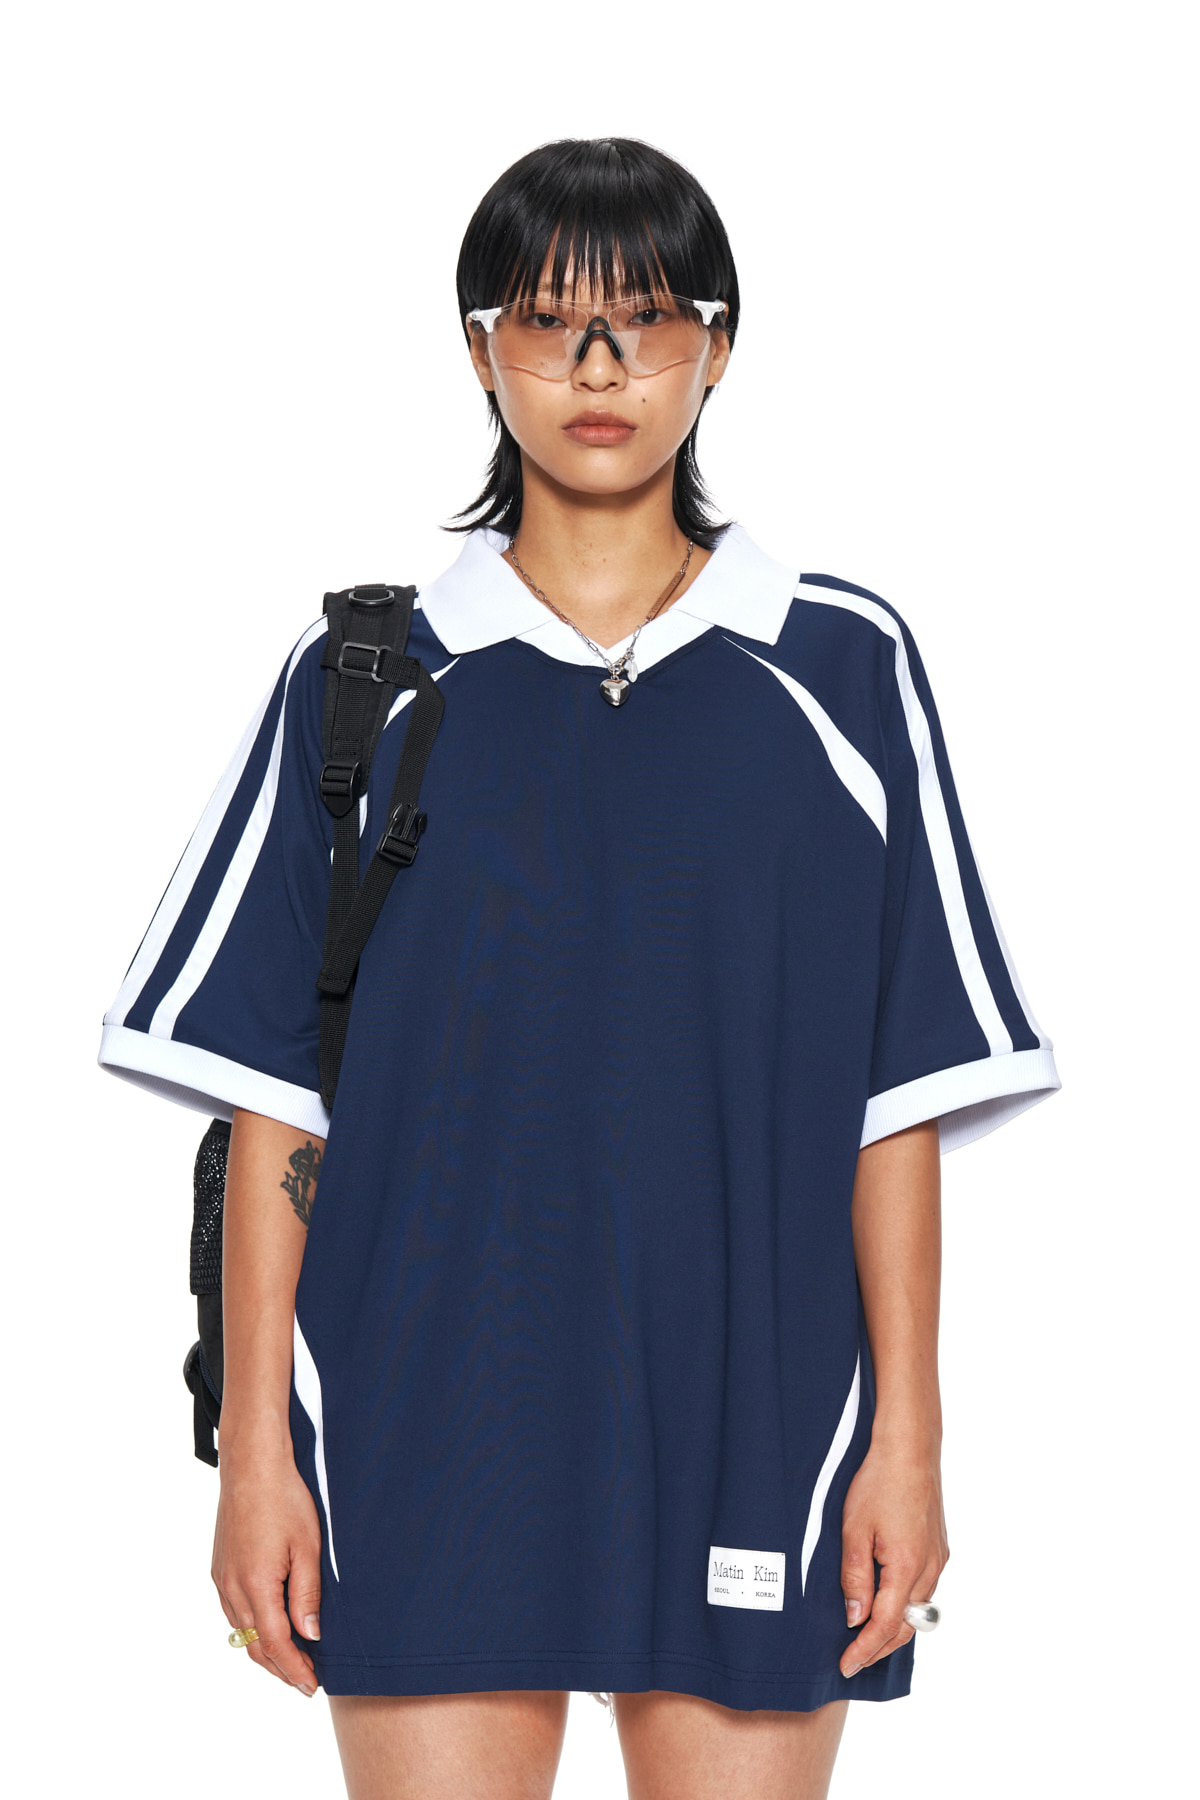 SPORTY TRACK JERSEY TOP IN NAVY